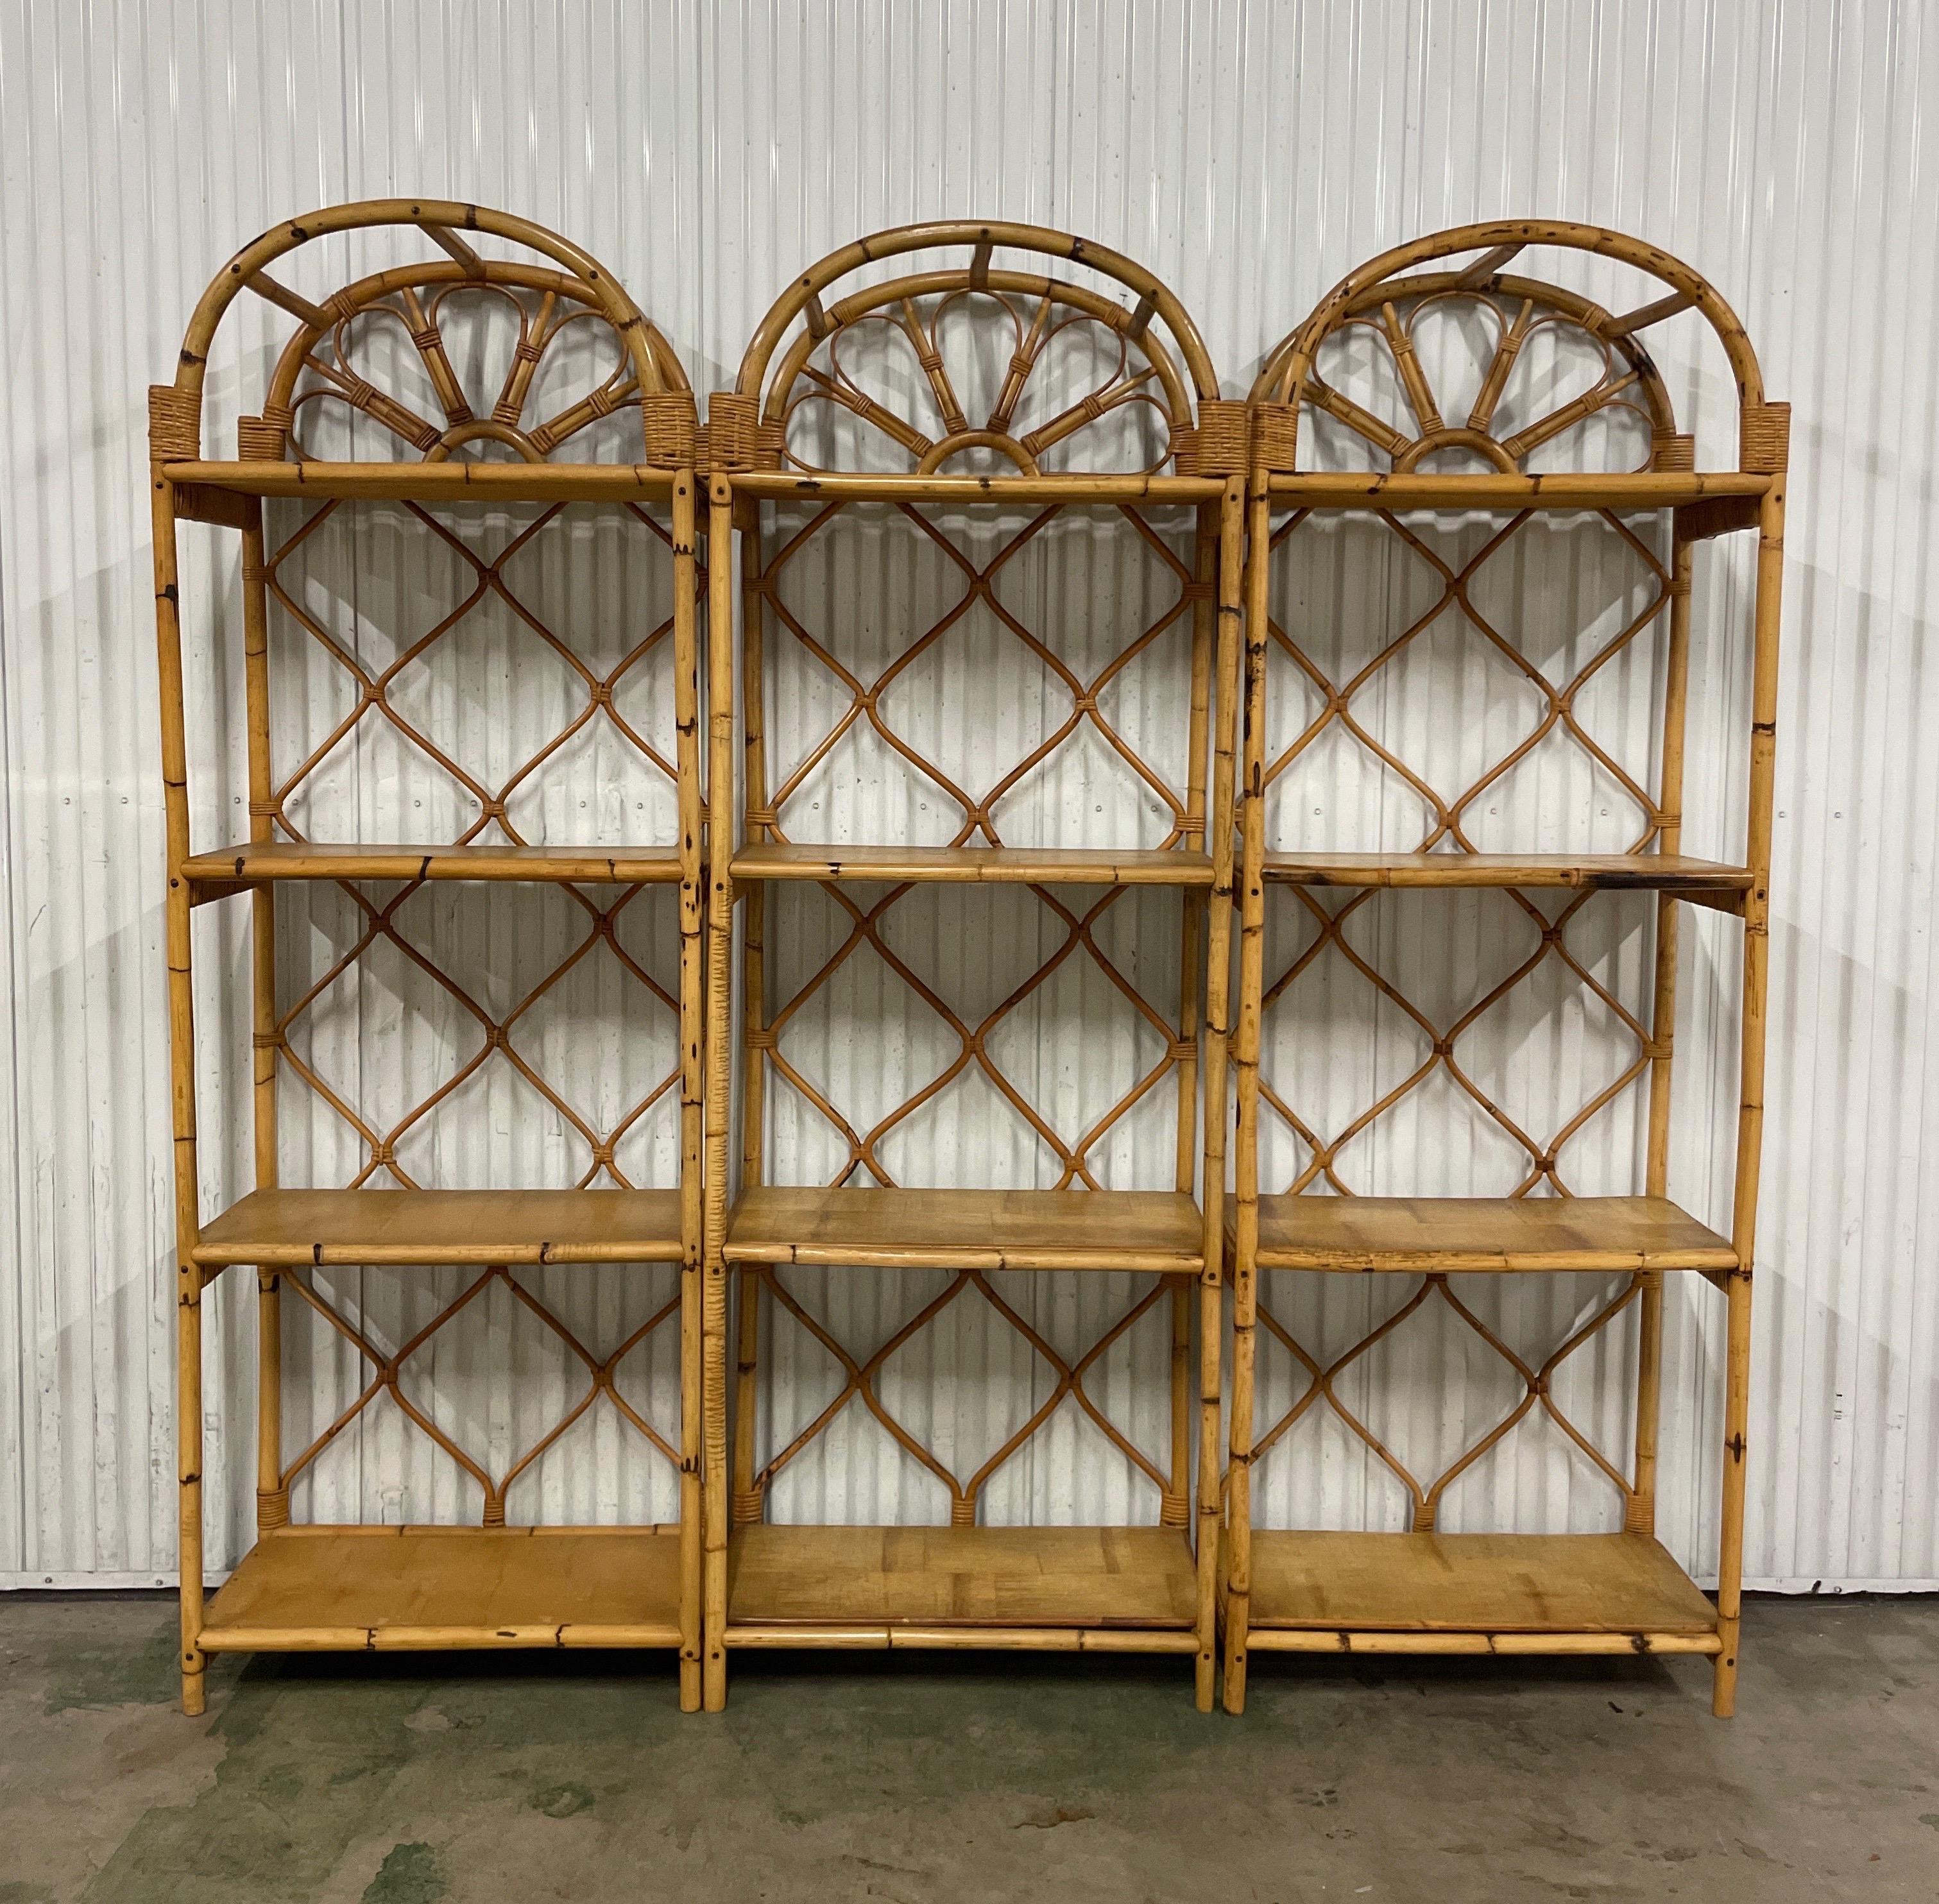 Vintage set of three Sunburst Rattan & bamboo etageres. Each etagere has four wood shelves. They can be used together as one large wall unit or can be used separately.